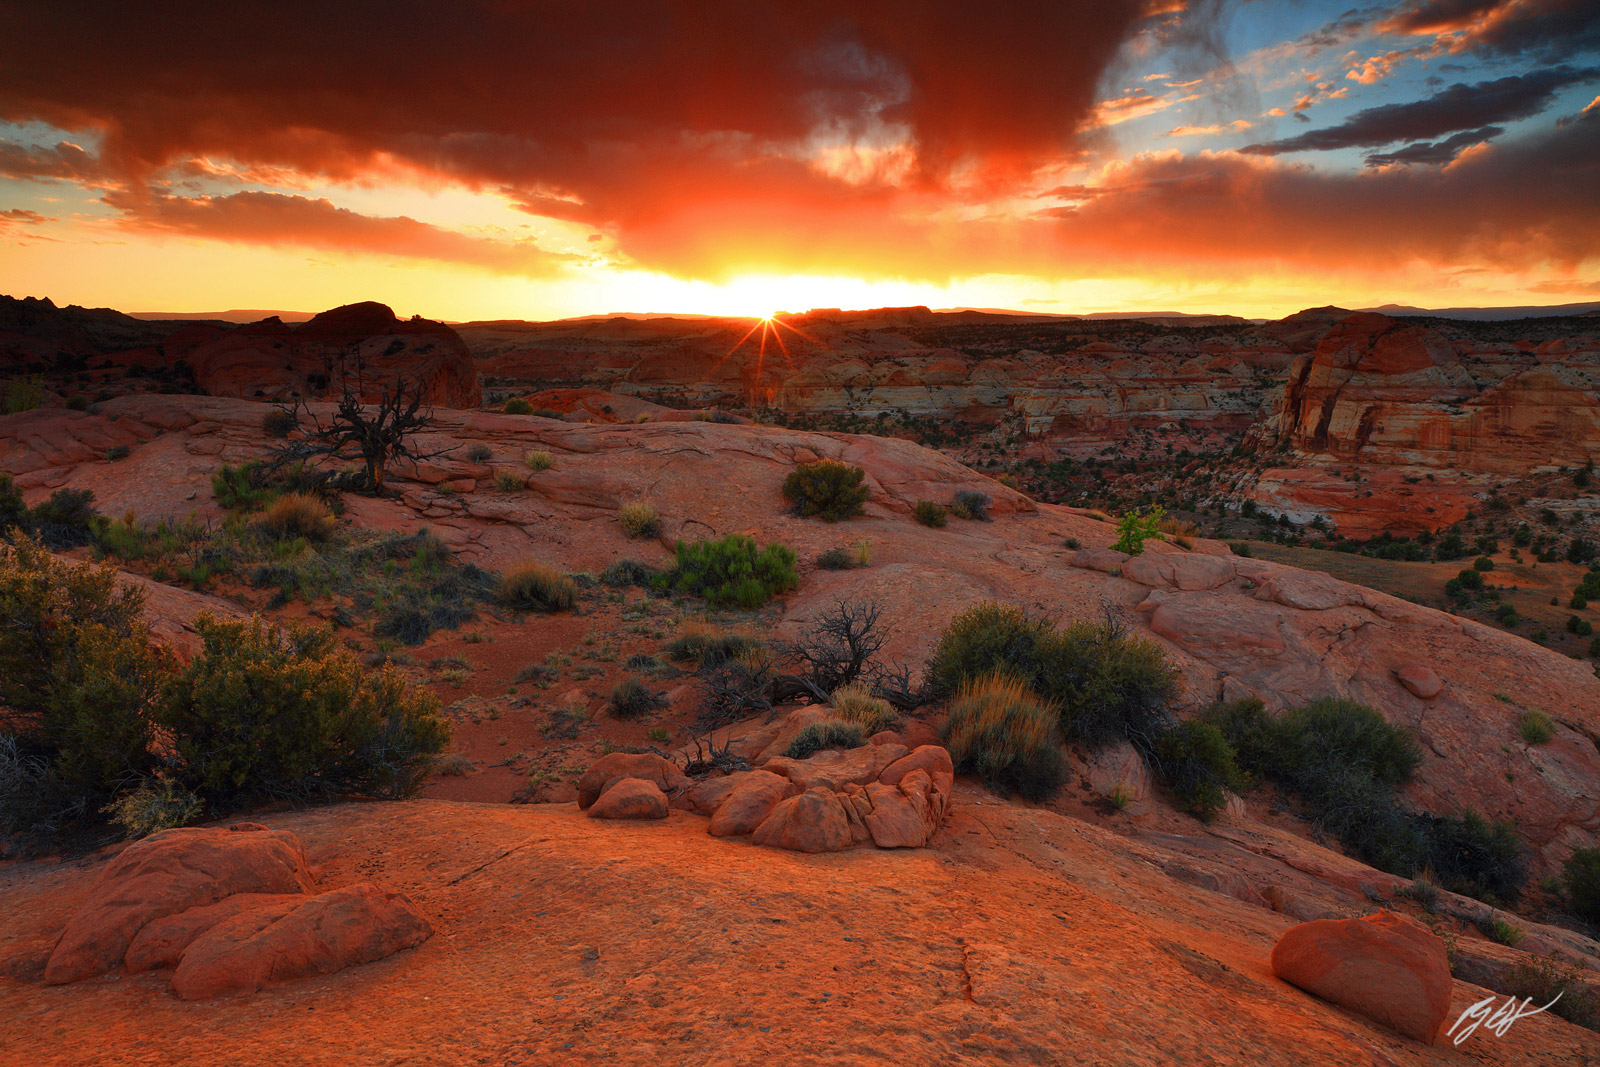 Sunset over Escalante Canyon in Grand Staircase-Escalante National Monument in Utah